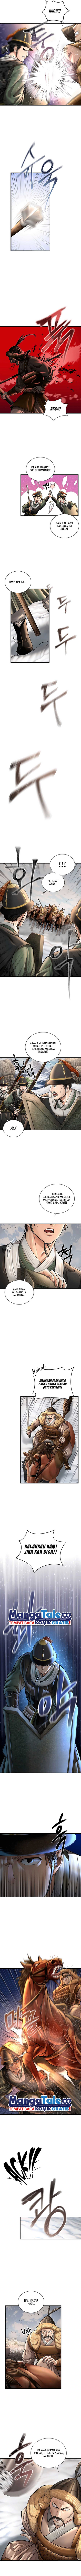 Muscle Joseon Chapter 42